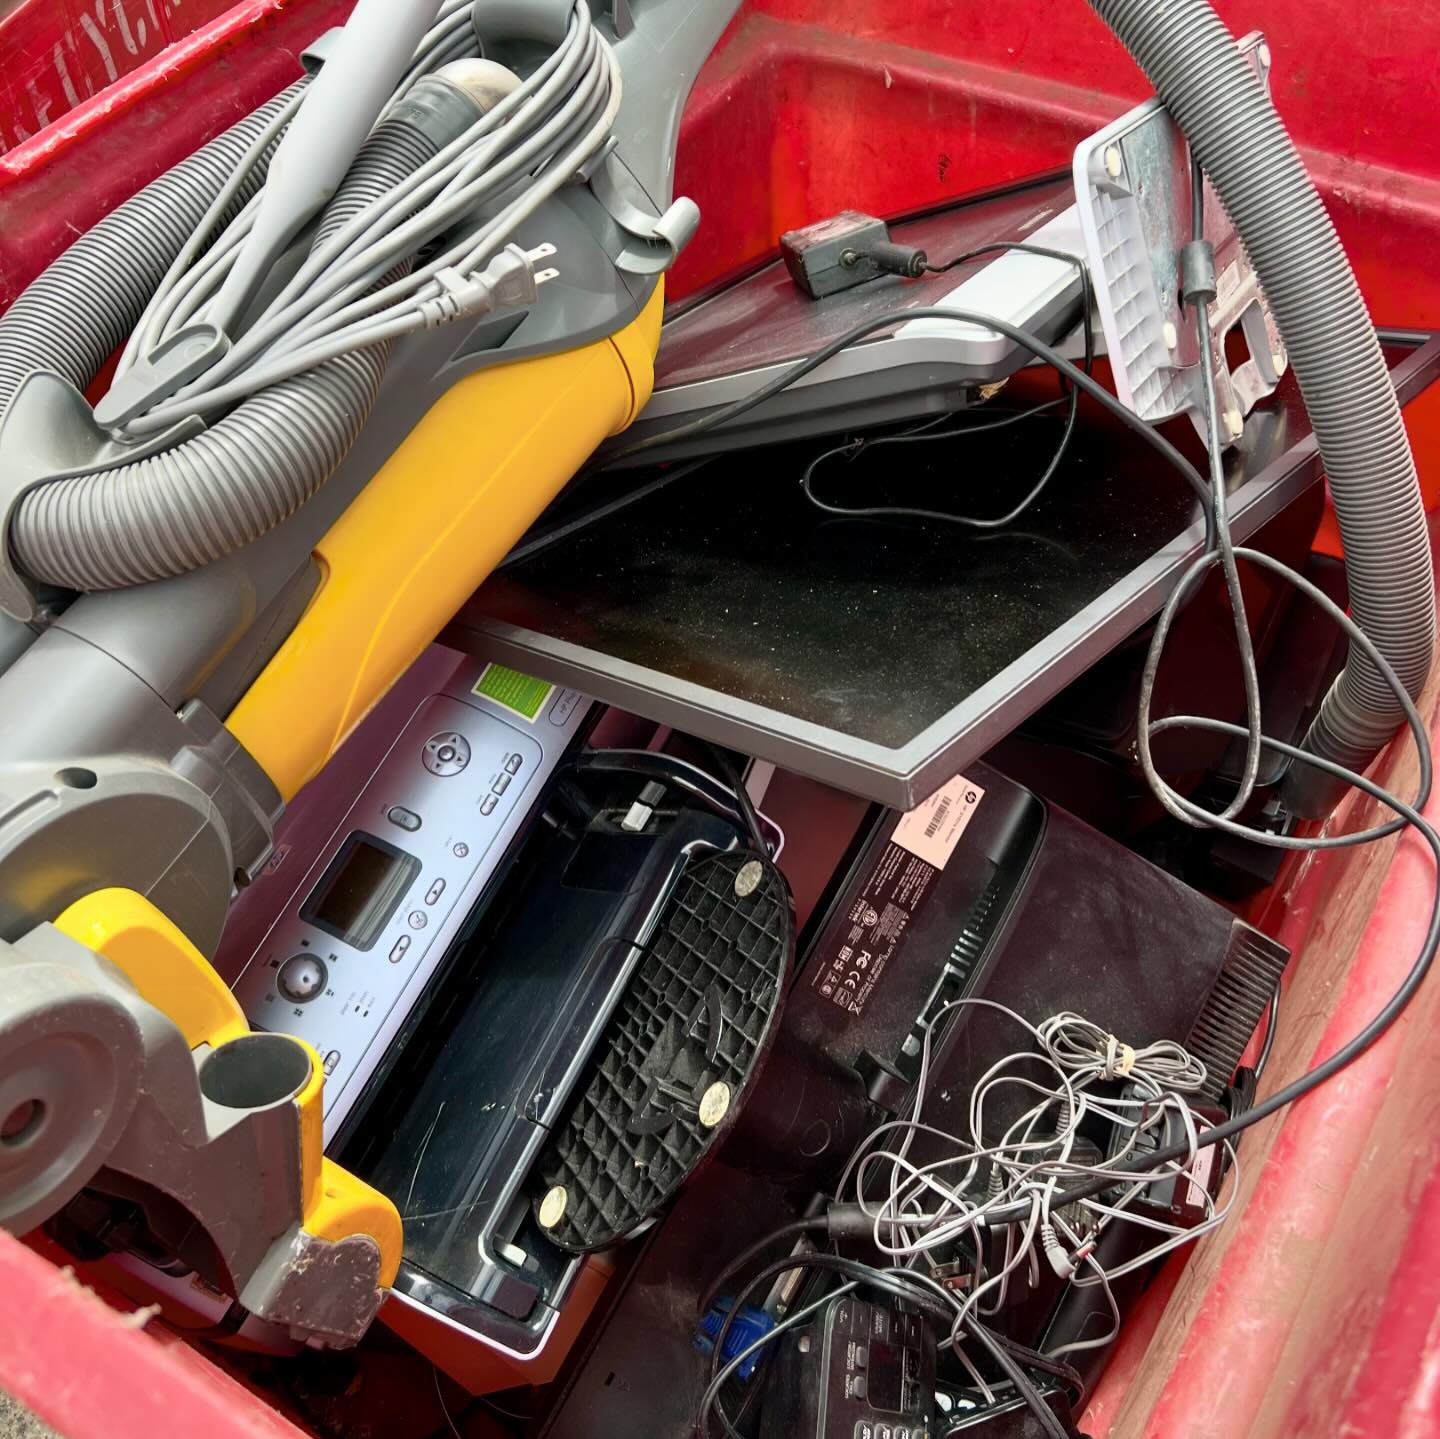 Thank you to everyone who supported our electronics Recycling fundraiser! Cords, TVs, printers, metal, vacuums and more won&rsquo;t end up in a landfill. ♻️ 🌎 💚 #adventmedfield #episcopalchurch #medfieldma #electronicsrecycling #creationcare #dioma